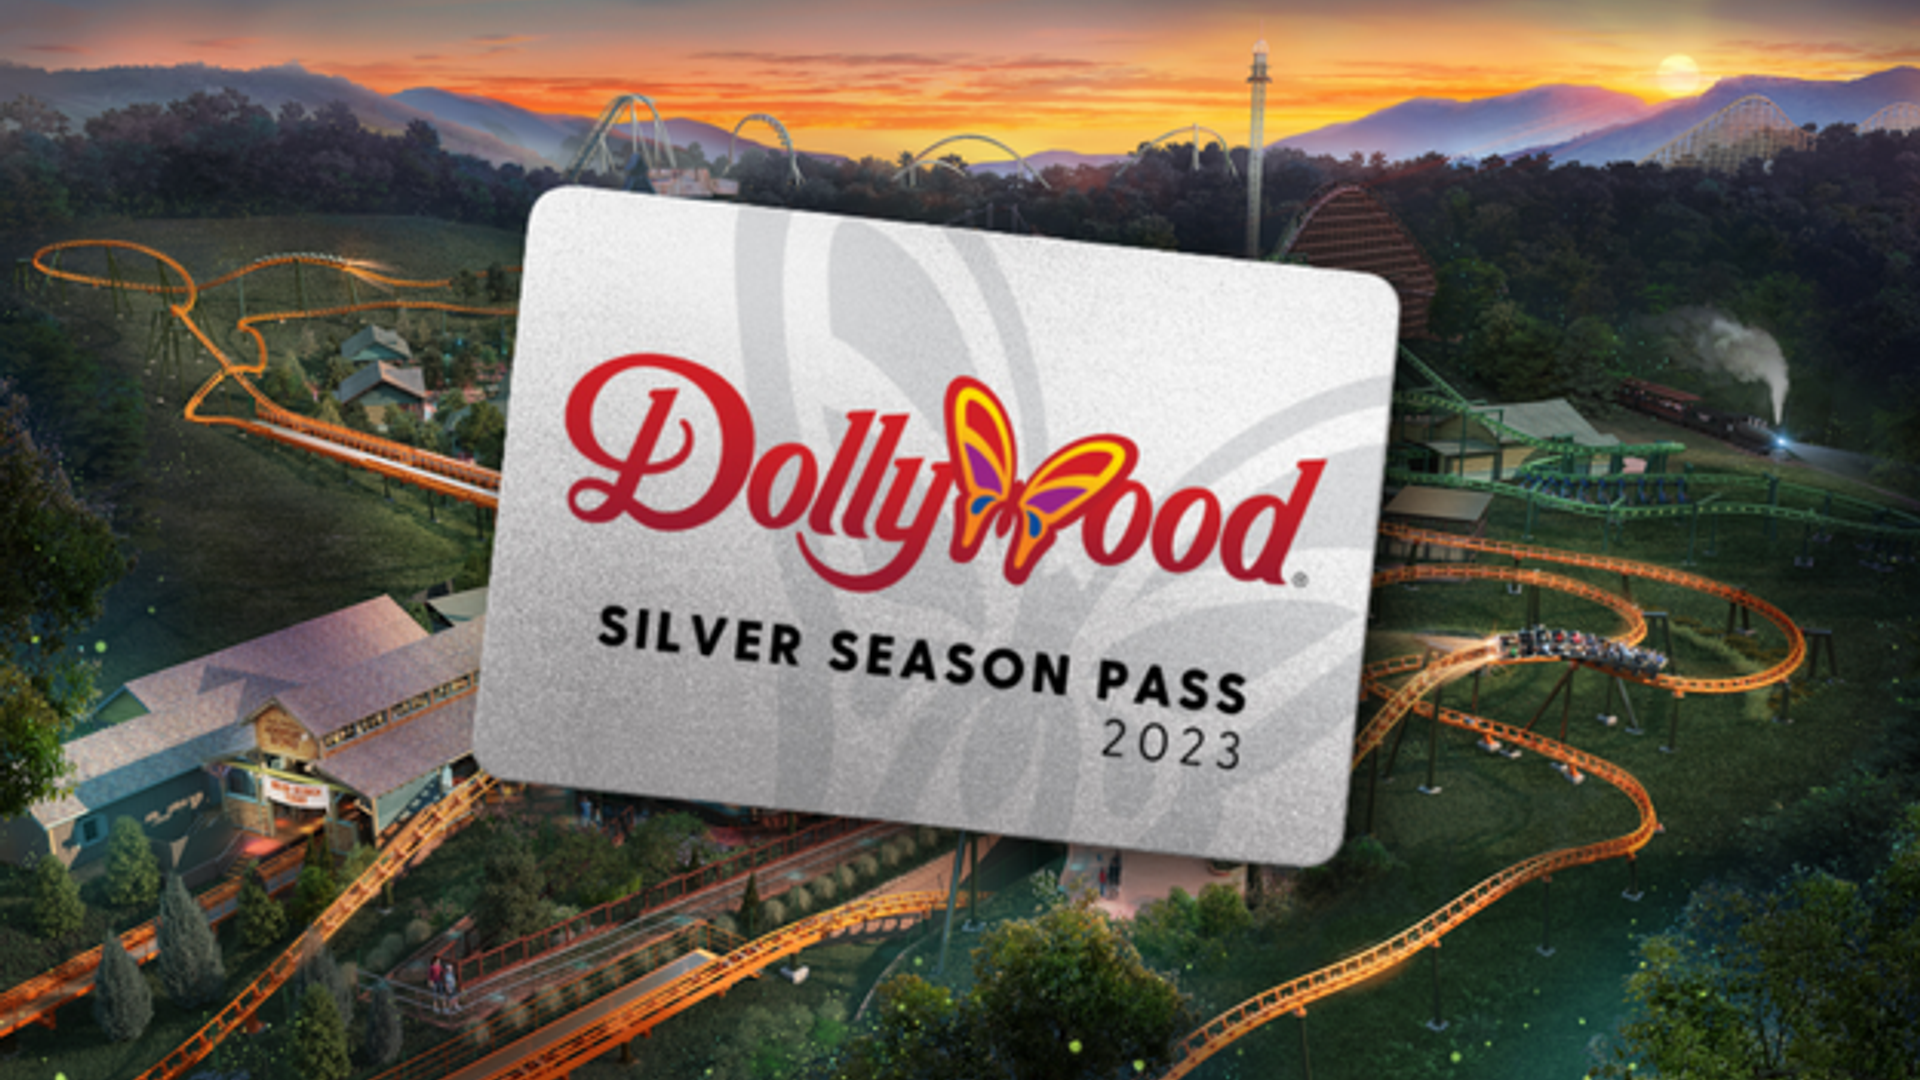 Save More Than $280 on Visits to Dollywood with a Silver Season Pass